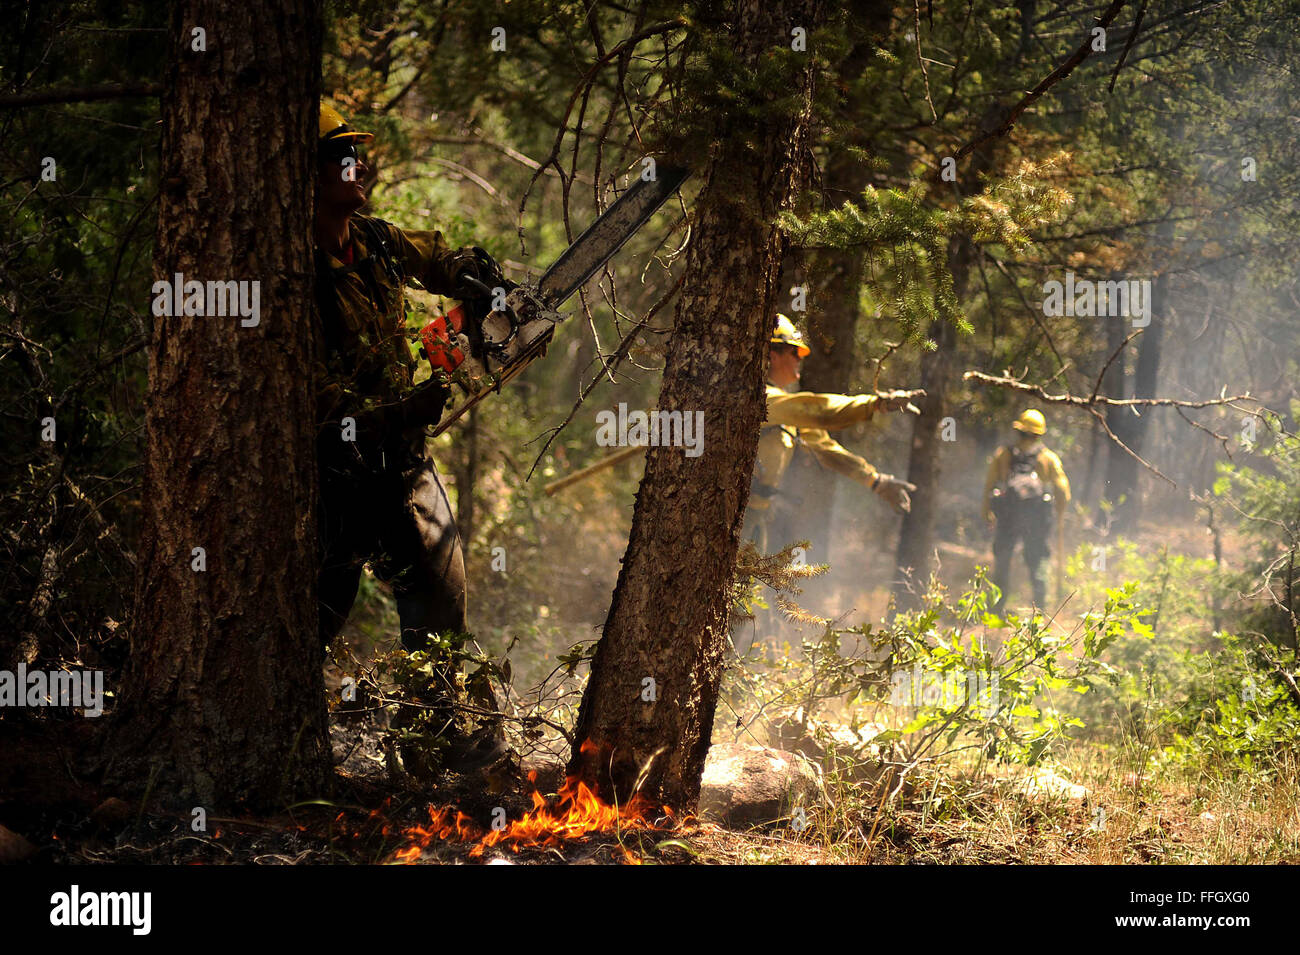 Vandenberg Air Force Base Hot Shot fire fighter Brad Mabery cuts a tree with his chainsaw while cutting and clearing a fire line on June 28, 2012 in the Mount Saint Francois area of Colorado Springs, Co. His team is helping to battle several fires in Waldo Canyon.  The Waldo Canyon fire has grown to 18,500 acres and burned over 300 homes. Currently, more than 90 firefighters from the Academy, along with assets from Air Force Space Command; F.E. Warren Air Force Base, Wyo.; Fort Carson, Colo.; and the local community continue to fight the Waldo Canyon fire. Stock Photo